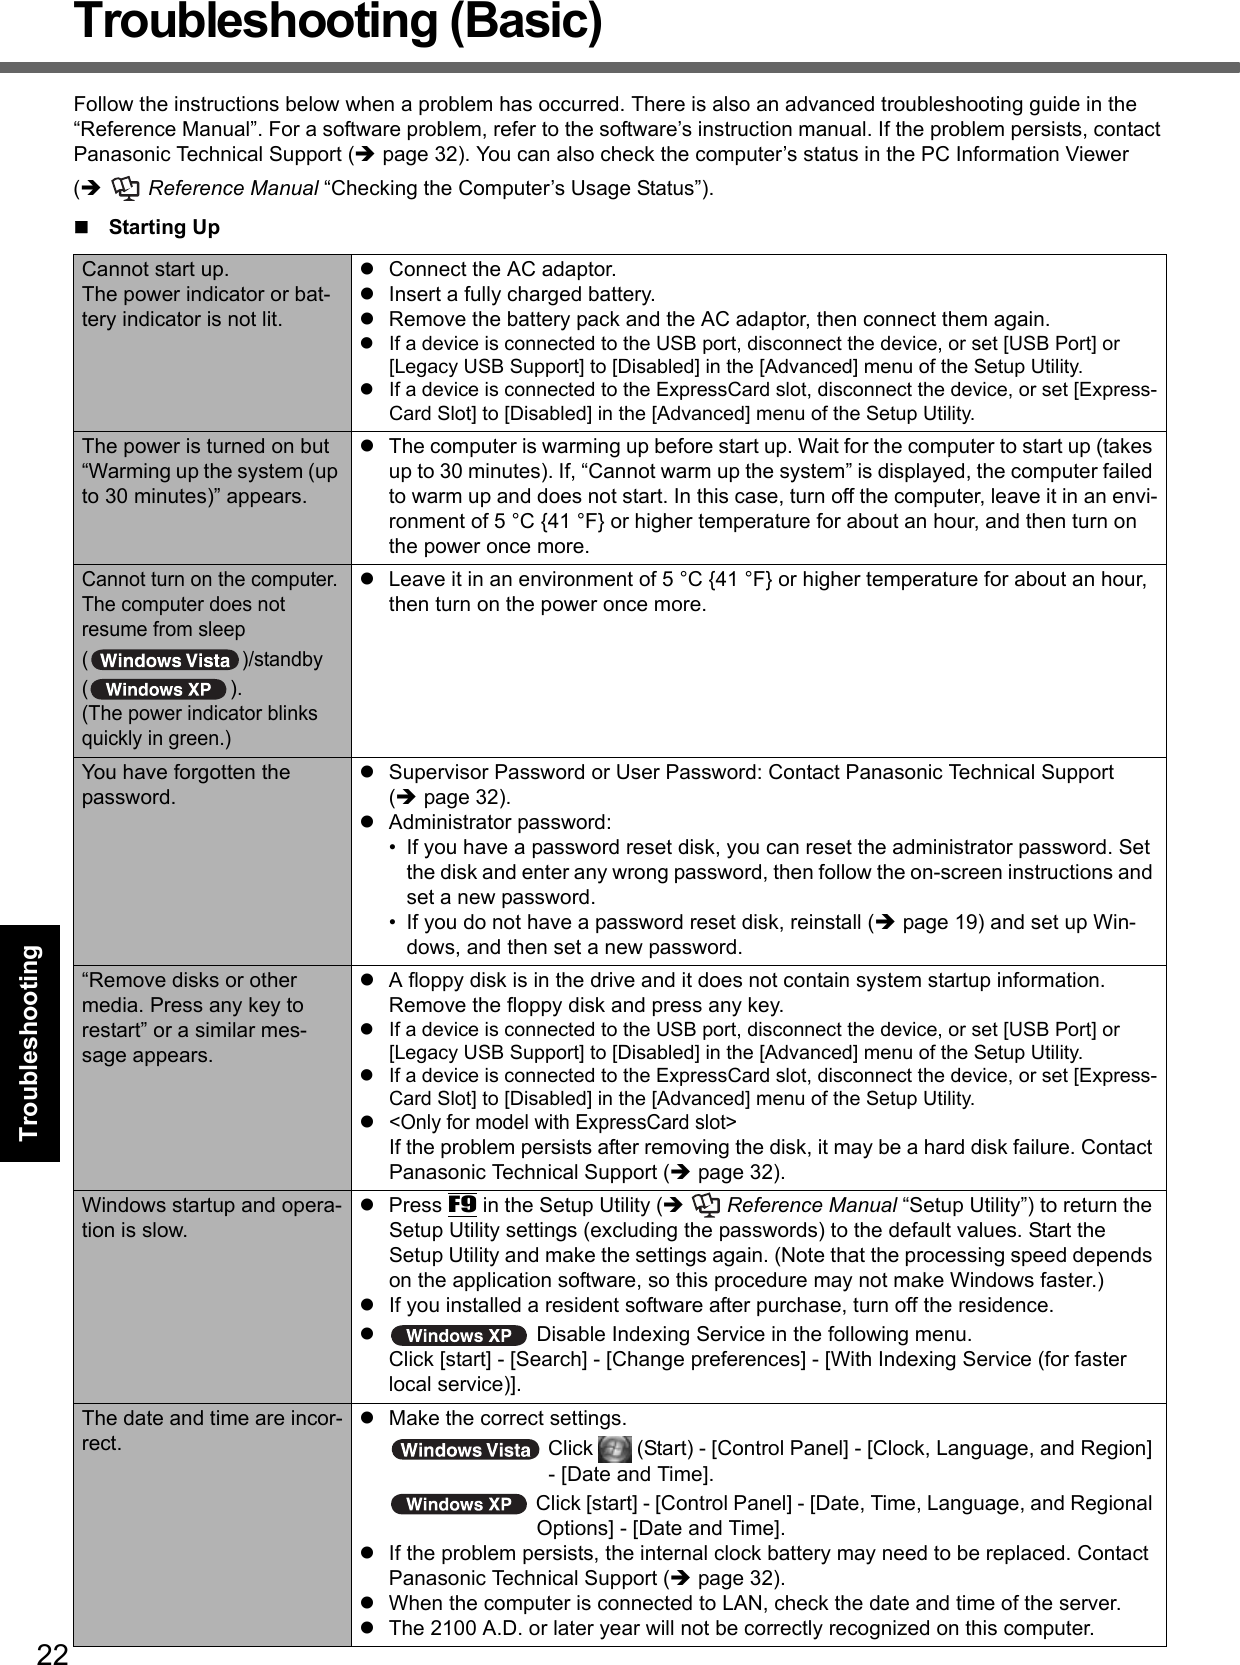 22Getting StartedUseful InformationTroubleshootingAppendixTroubleshooting (Basic)Follow the instructions below when a problem has occurred. There is also an advanced troubleshooting guide in the “Reference Manual”. For a software problem, refer to the software’s instruction manual. If the problem persists, contact Panasonic Technical Support (Îpage 32). You can also check the computer’s status in the PC Information Viewer (Î Reference Manual “Checking the Computer’s Usage Status”).Starting UpCannot start up.The power indicator or bat-tery indicator is not lit.zConnect the AC adaptor.zInsert a fully charged battery.zRemove the battery pack and the AC adaptor, then connect them again. zIf a device is connected to the USB port, disconnect the device, or set [USB Port] or [Legacy USB Support] to [Disabled] in the [Advanced] menu of the Setup Utility.zIf a device is connected to the ExpressCard slot, disconnect the device, or set [Express-Card Slot] to [Disabled] in the [Advanced] menu of the Setup Utility.The power is turned on but “Warming up the system (up to 30 minutes)” appears.zThe computer is warming up before start up. Wait for the computer to start up (takes up to 30 minutes). If, “Cannot warm up the system” is displayed, the computer failed to warm up and does not start. In this case, turn off the computer, leave it in an envi-ronment of 5 °C {41 °F} or higher temperature for about an hour, and then turn on the power once more.Cannot turn on the computer.The computer does not resume from sleep ( )/standby ().(The power indicator blinks quickly in green.)zLeave it in an environment of 5 °C {41 °F} or higher temperature for about an hour, then turn on the power once more.You have forgotten the password.zSupervisor Password or User Password: Contact Panasonic Technical Support (Îpage 32).zAdministrator password: • If you have a password reset disk, you can reset the administrator password. Set the disk and enter any wrong password, then follow the on-screen instructions and set a new password.• If you do not have a password reset disk, reinstall (Îpage 19) and set up Win-dows, and then set a new password.“Remove disks or other media. Press any key to restart” or a similar mes-sage appears.zA floppy disk is in the drive and it does not contain system startup information. Remove the floppy disk and press any key.zIf a device is connected to the USB port, disconnect the device, or set [USB Port] or [Legacy USB Support] to [Disabled] in the [Advanced] menu of the Setup Utility.zIf a device is connected to the ExpressCard slot, disconnect the device, or set [Express-Card Slot] to [Disabled] in the [Advanced] menu of the Setup Utility.z&lt;Only for model with ExpressCard slot&gt;If the problem persists after removing the disk, it may be a hard disk failure. Contact Panasonic Technical Support (Îpage 32).Windows startup and opera-tion is slow.zPress F9 in the Setup Utility (Î Reference Manual “Setup Utility”) to return the Setup Utility settings (excluding the passwords) to the default values. Start the Setup Utility and make the settings again. (Note that the processing speed depends on the application software, so this procedure may not make Windows faster.)zIf you installed a resident software after purchase, turn off the residence.z Disable Indexing Service in the following menu.Click [start] - [Search] - [Change preferences] - [With Indexing Service (for faster local service)].The date and time are incor-rect.zMake the correct settings.  Click   (Start) - [Control Panel] - [Clock, Language, and Region] - [Date and Time]. Click [start] - [Control Panel] - [Date, Time, Language, and Regional Options] - [Date and Time].zIf the problem persists, the internal clock battery may need to be replaced. Contact Panasonic Technical Support (Îpage 32).zWhen the computer is connected to LAN, check the date and time of the server.zThe 2100 A.D. or later year will not be correctly recognized on this computer.